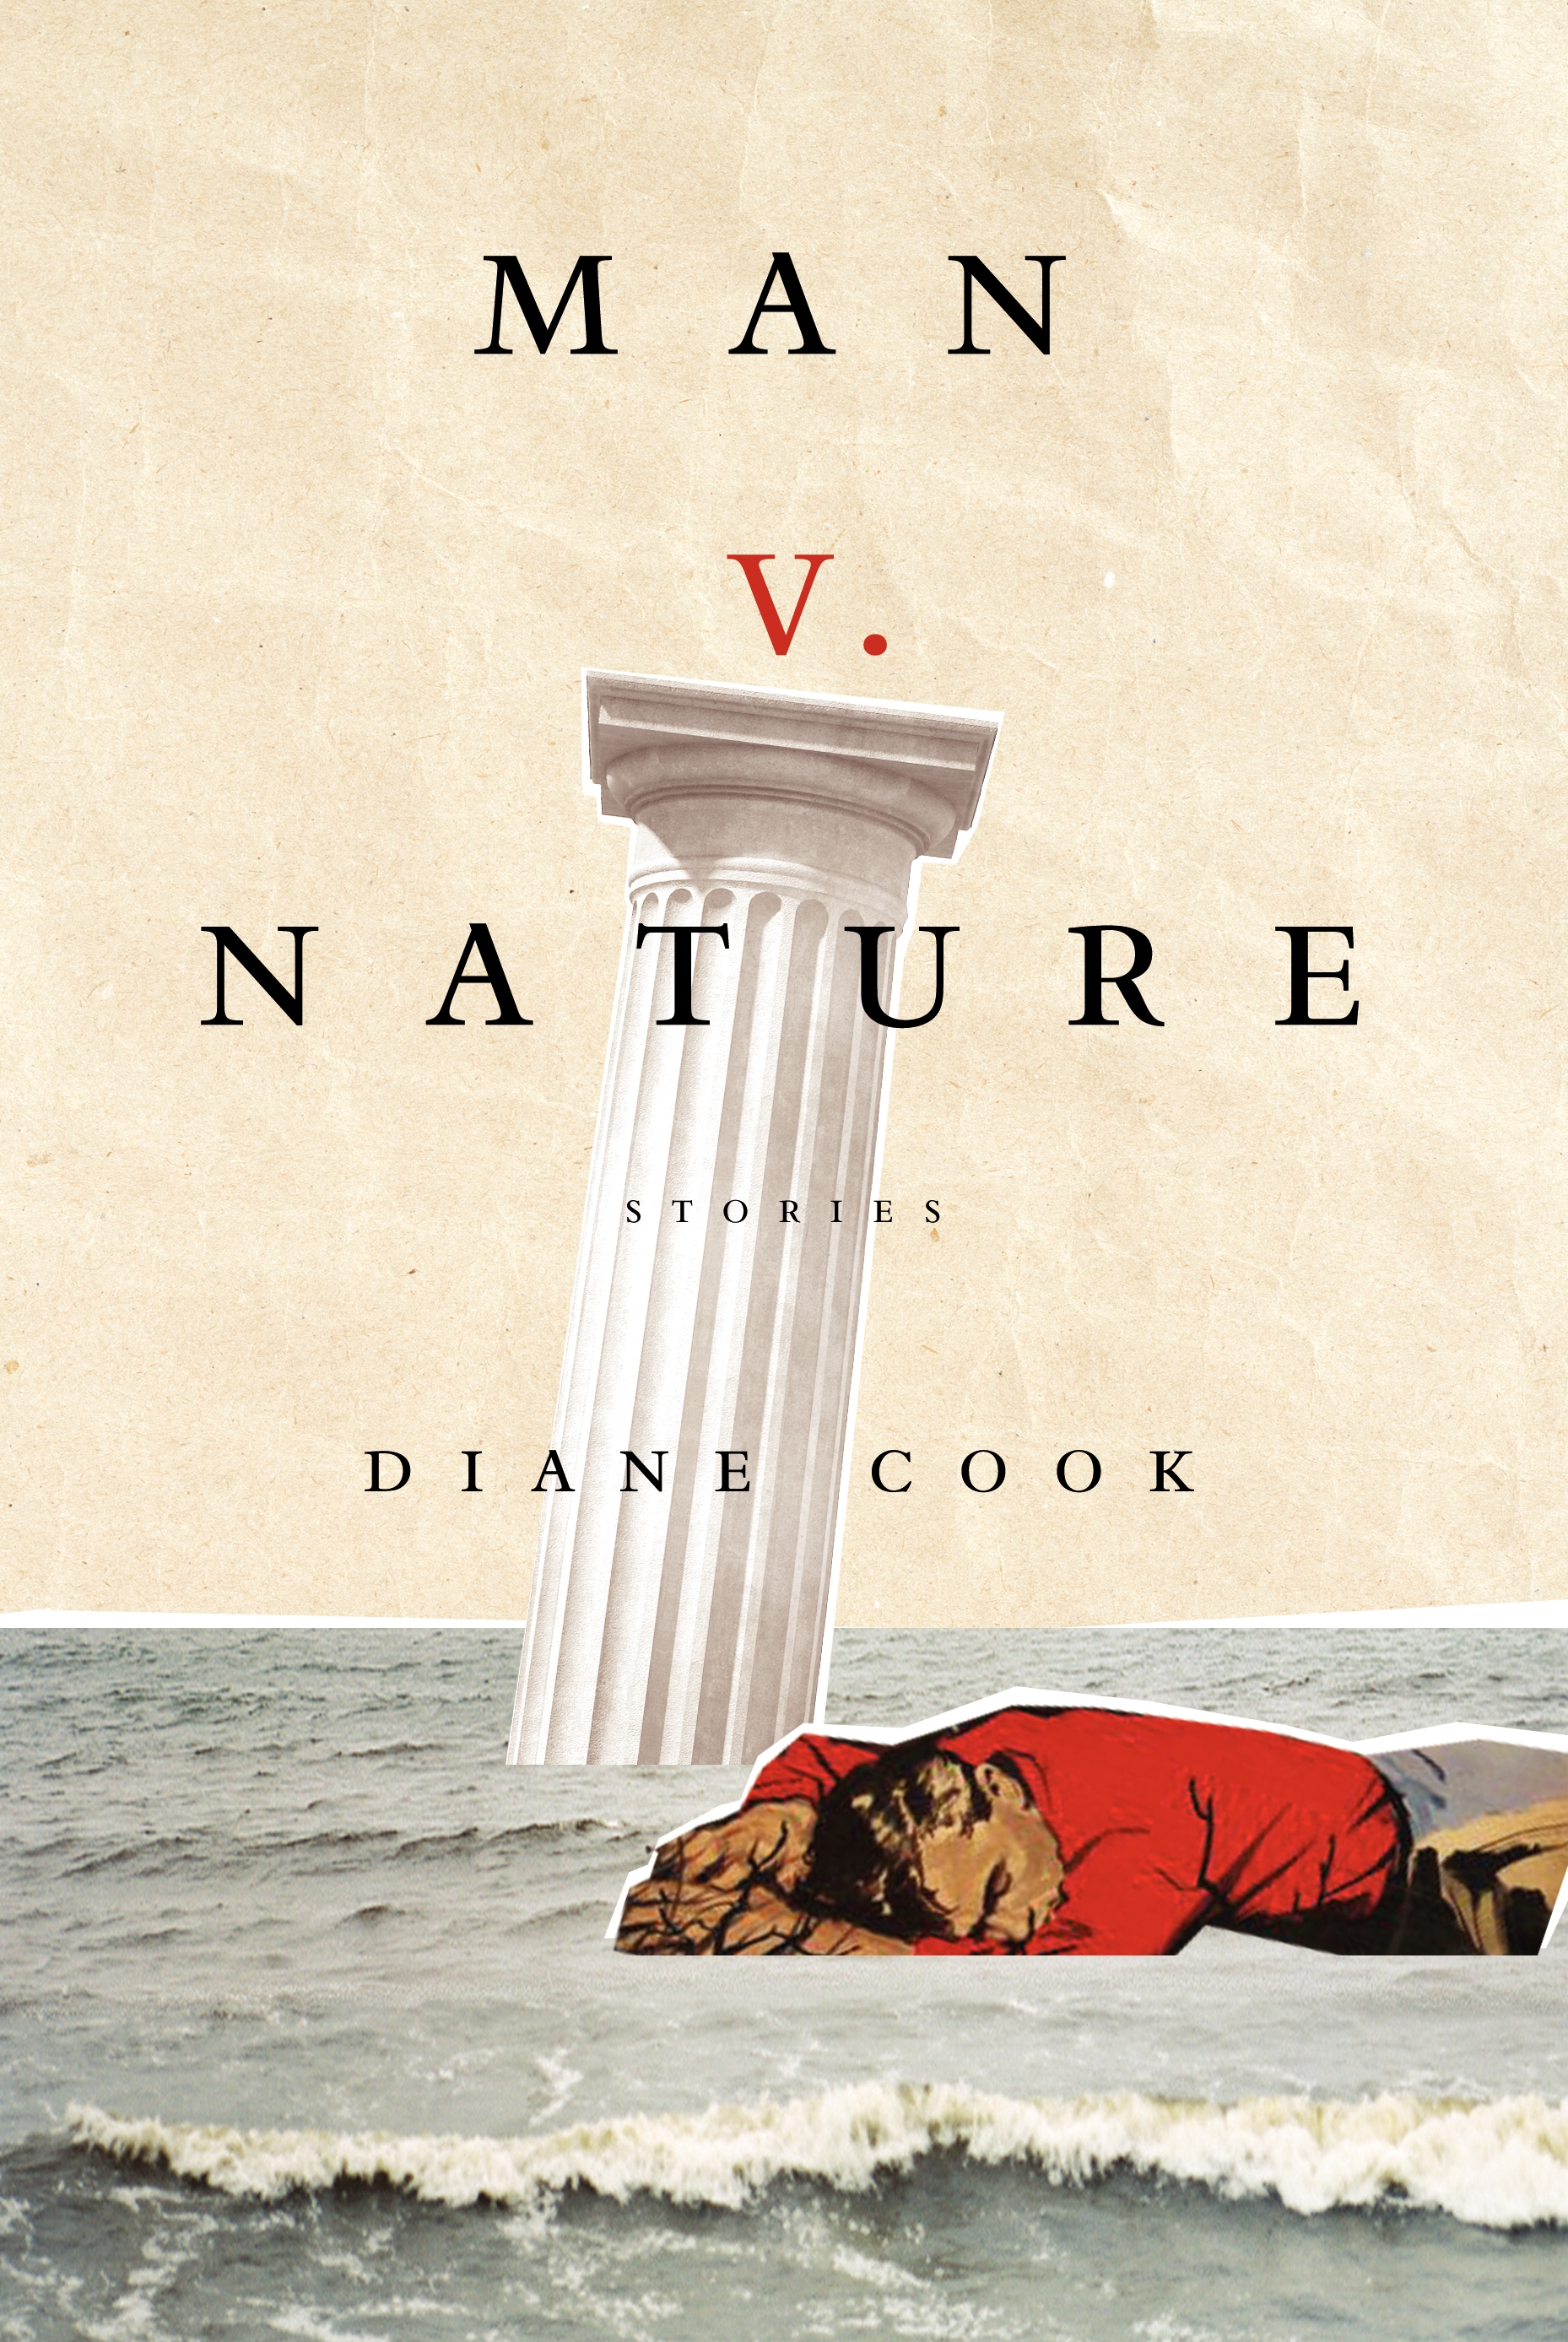 Book Launch: Man V. Nature by Diane Cook, with Lincoln Michel